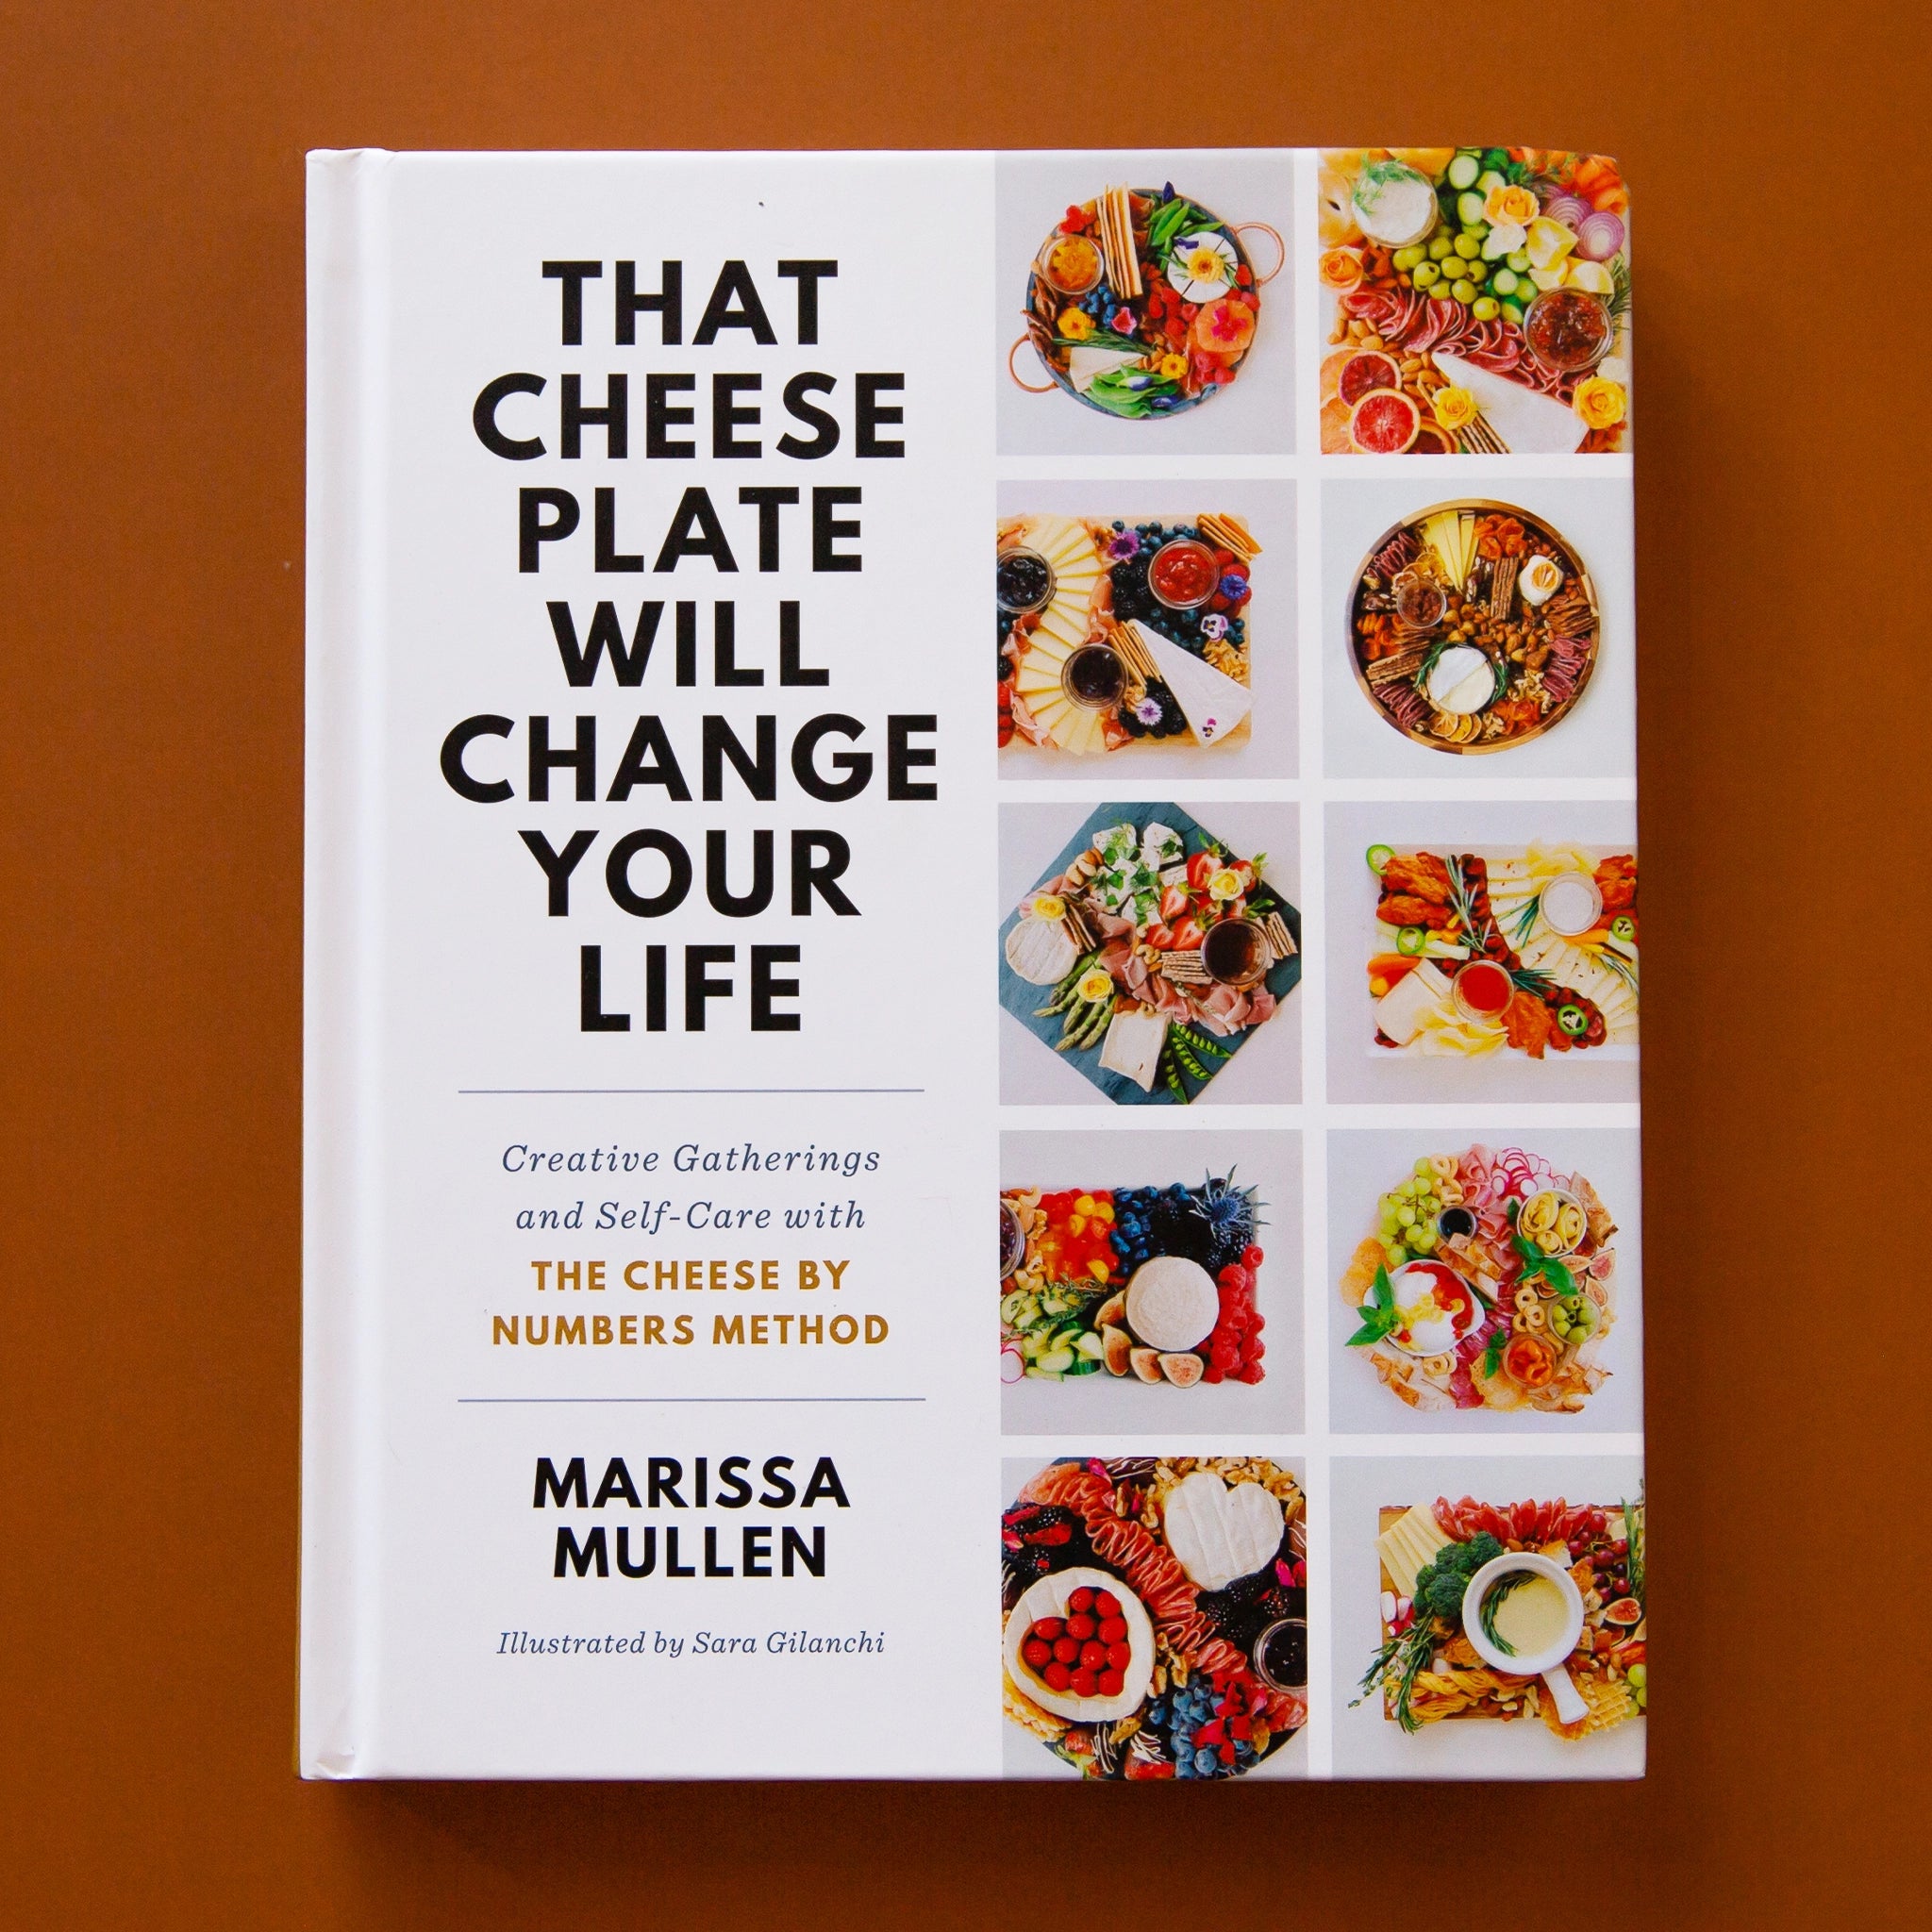 The front cover of the book reads &#39;That Cheese Plate Will Change Your Life&#39; in bold black lettering on the left side. Below reads &#39;Creative Gathering and Self-Care with The Cheese by Numbers Method&#39; in smaller text. To the right is 10 squares filled with a variety of well put together charcuterie boards, filled with cheeses, crackers, jams and more.